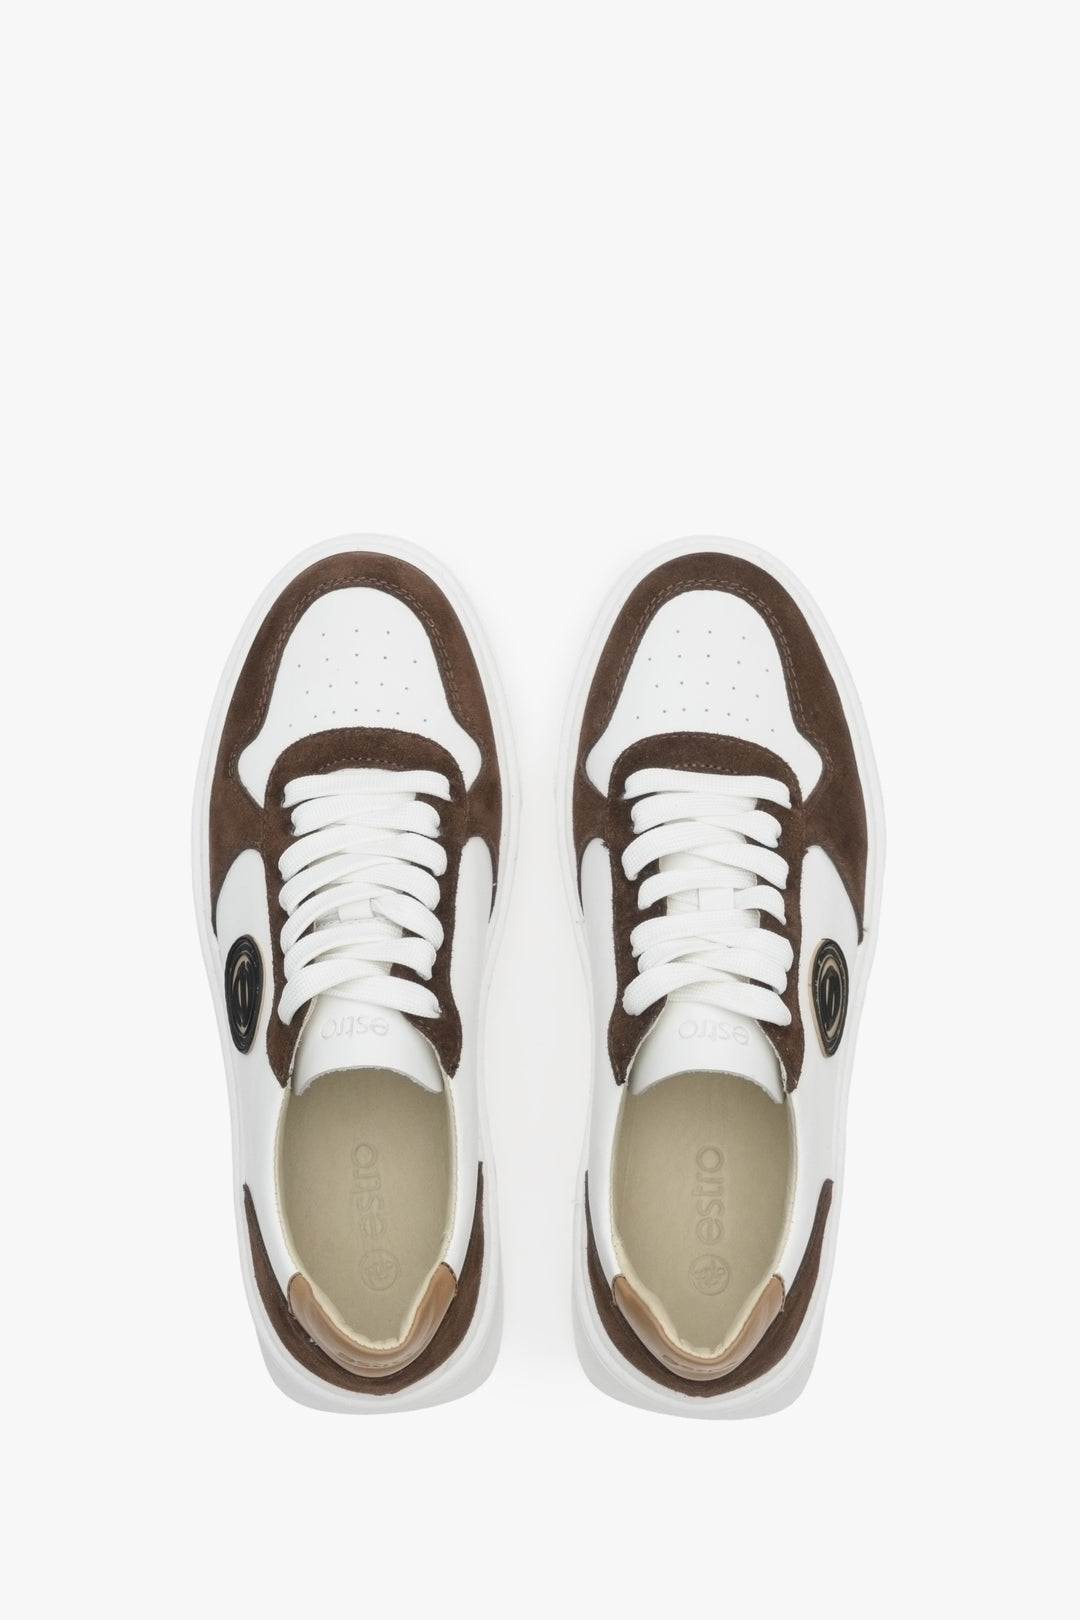 White and brown women's sneakers for spring and autumn Estro - footwear presentation from above.